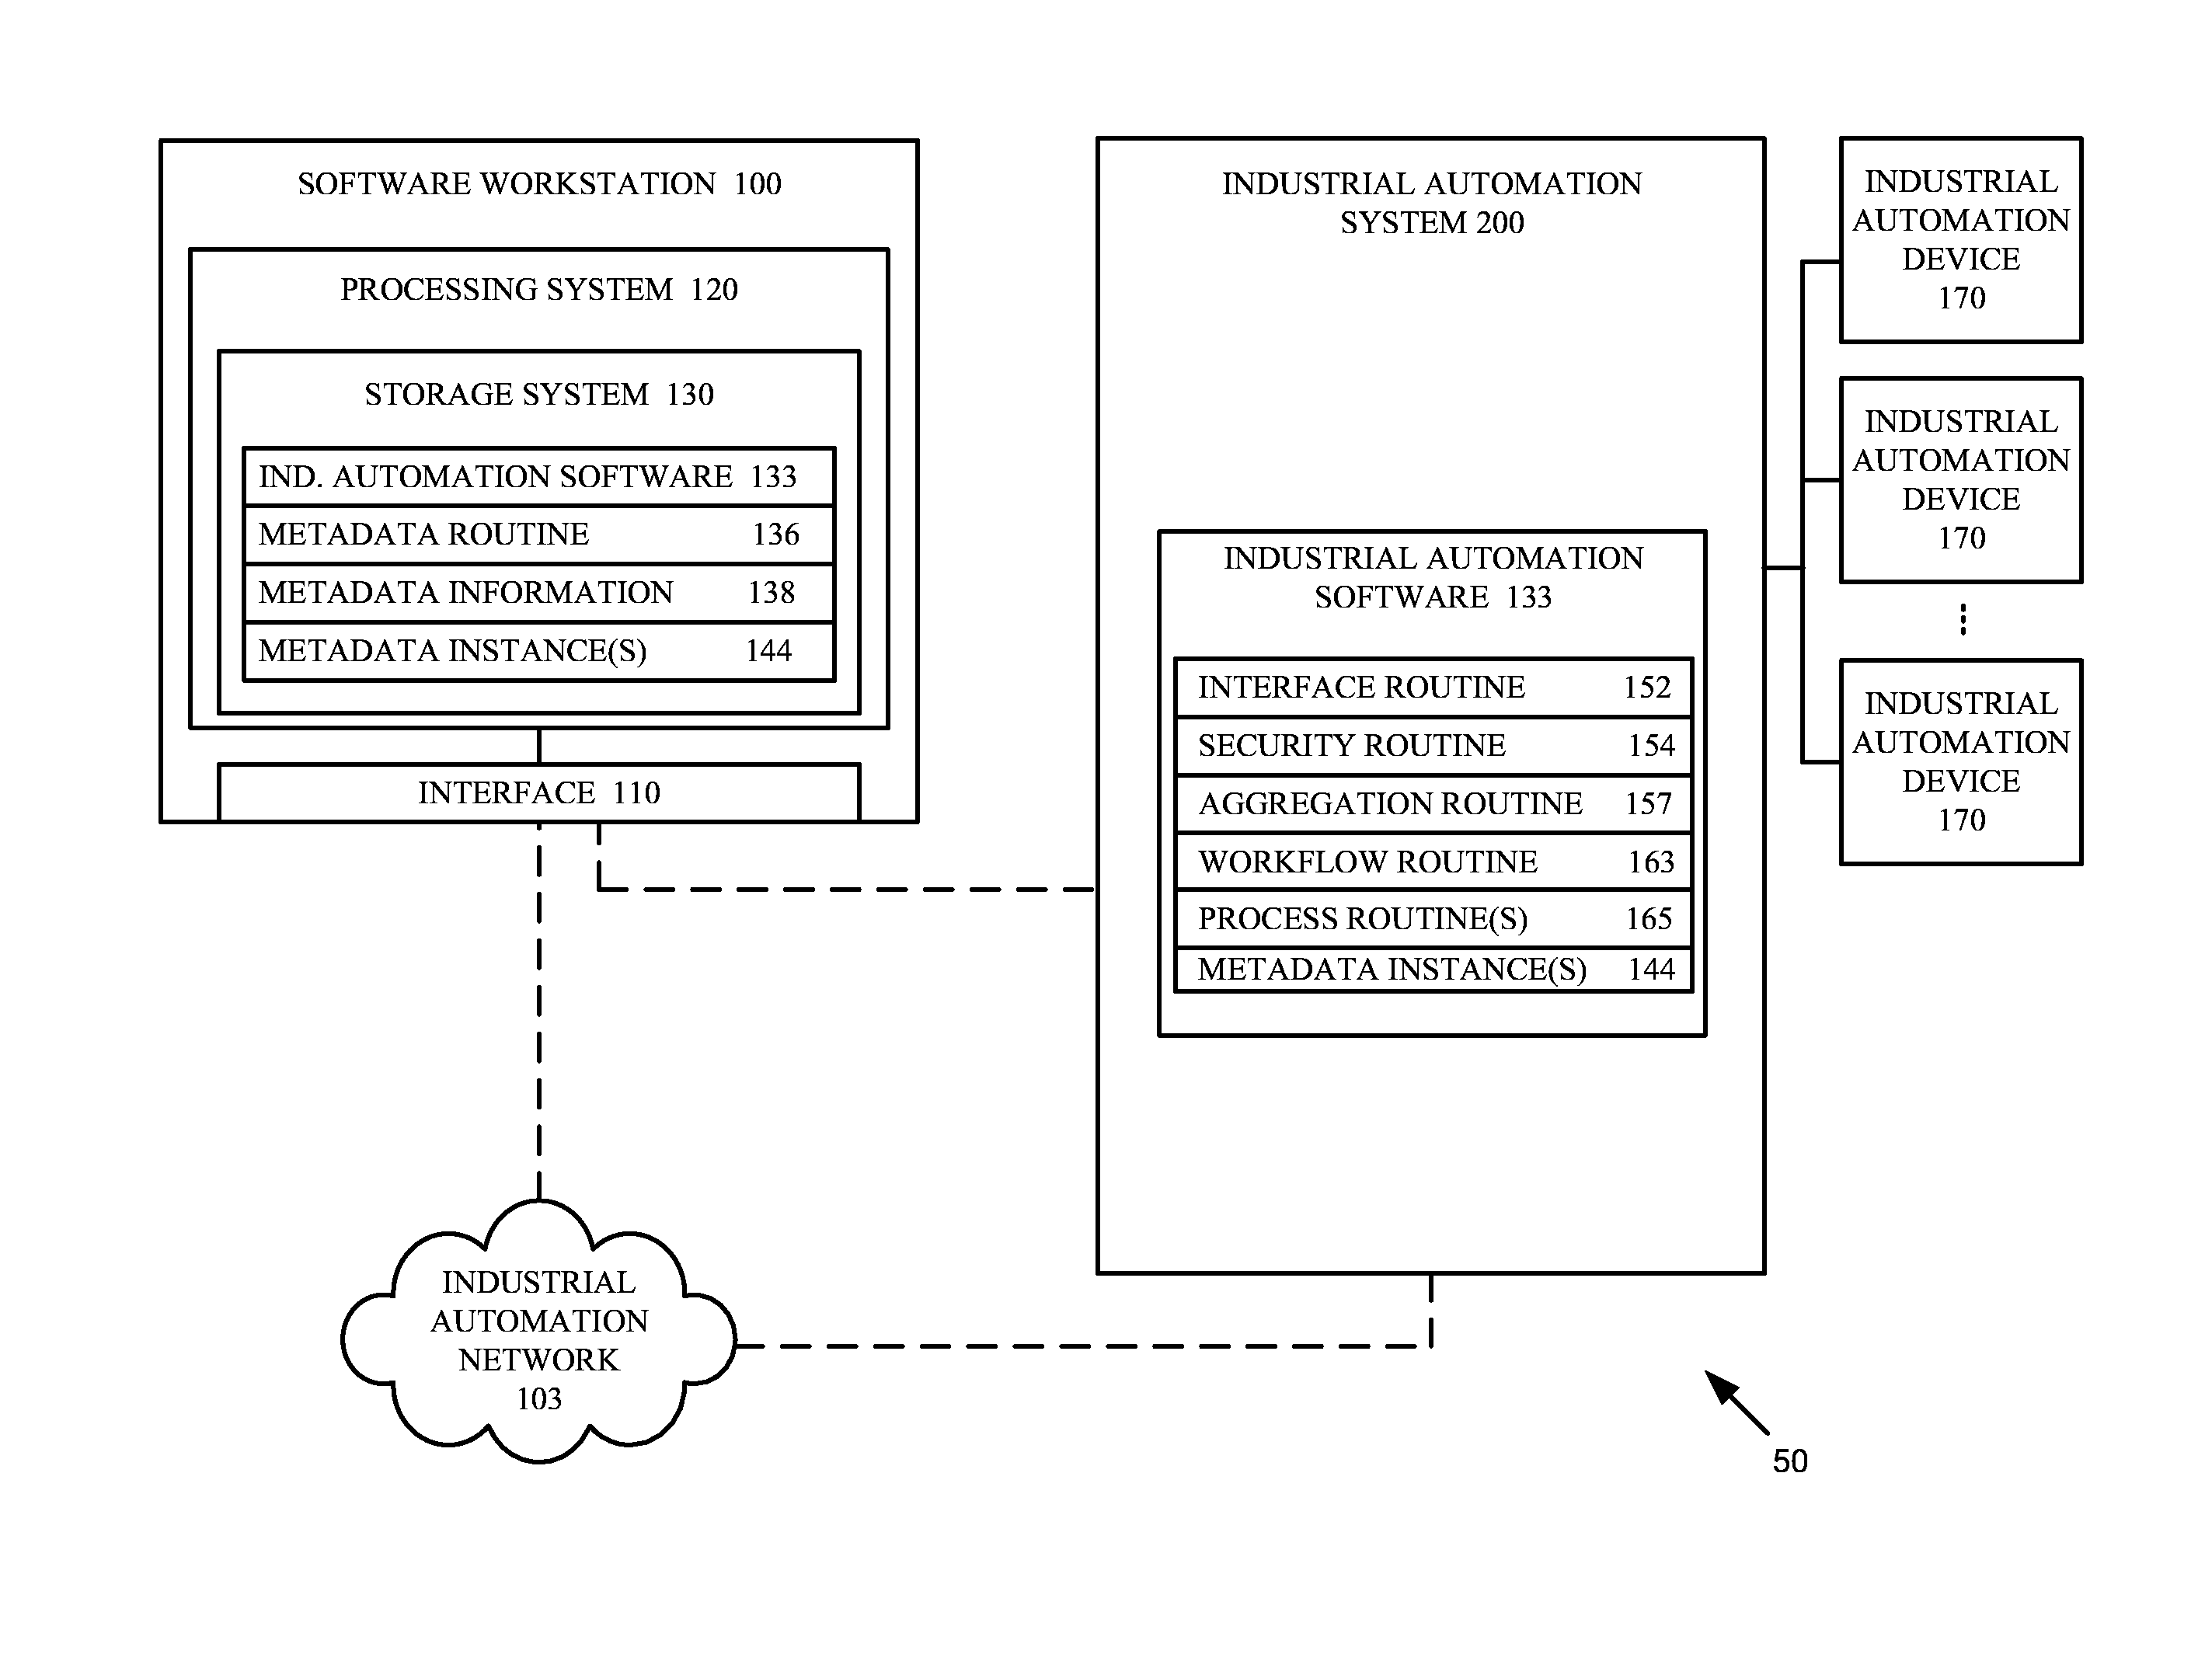 Software workstation and method for employing appended metadata in industrial automation software